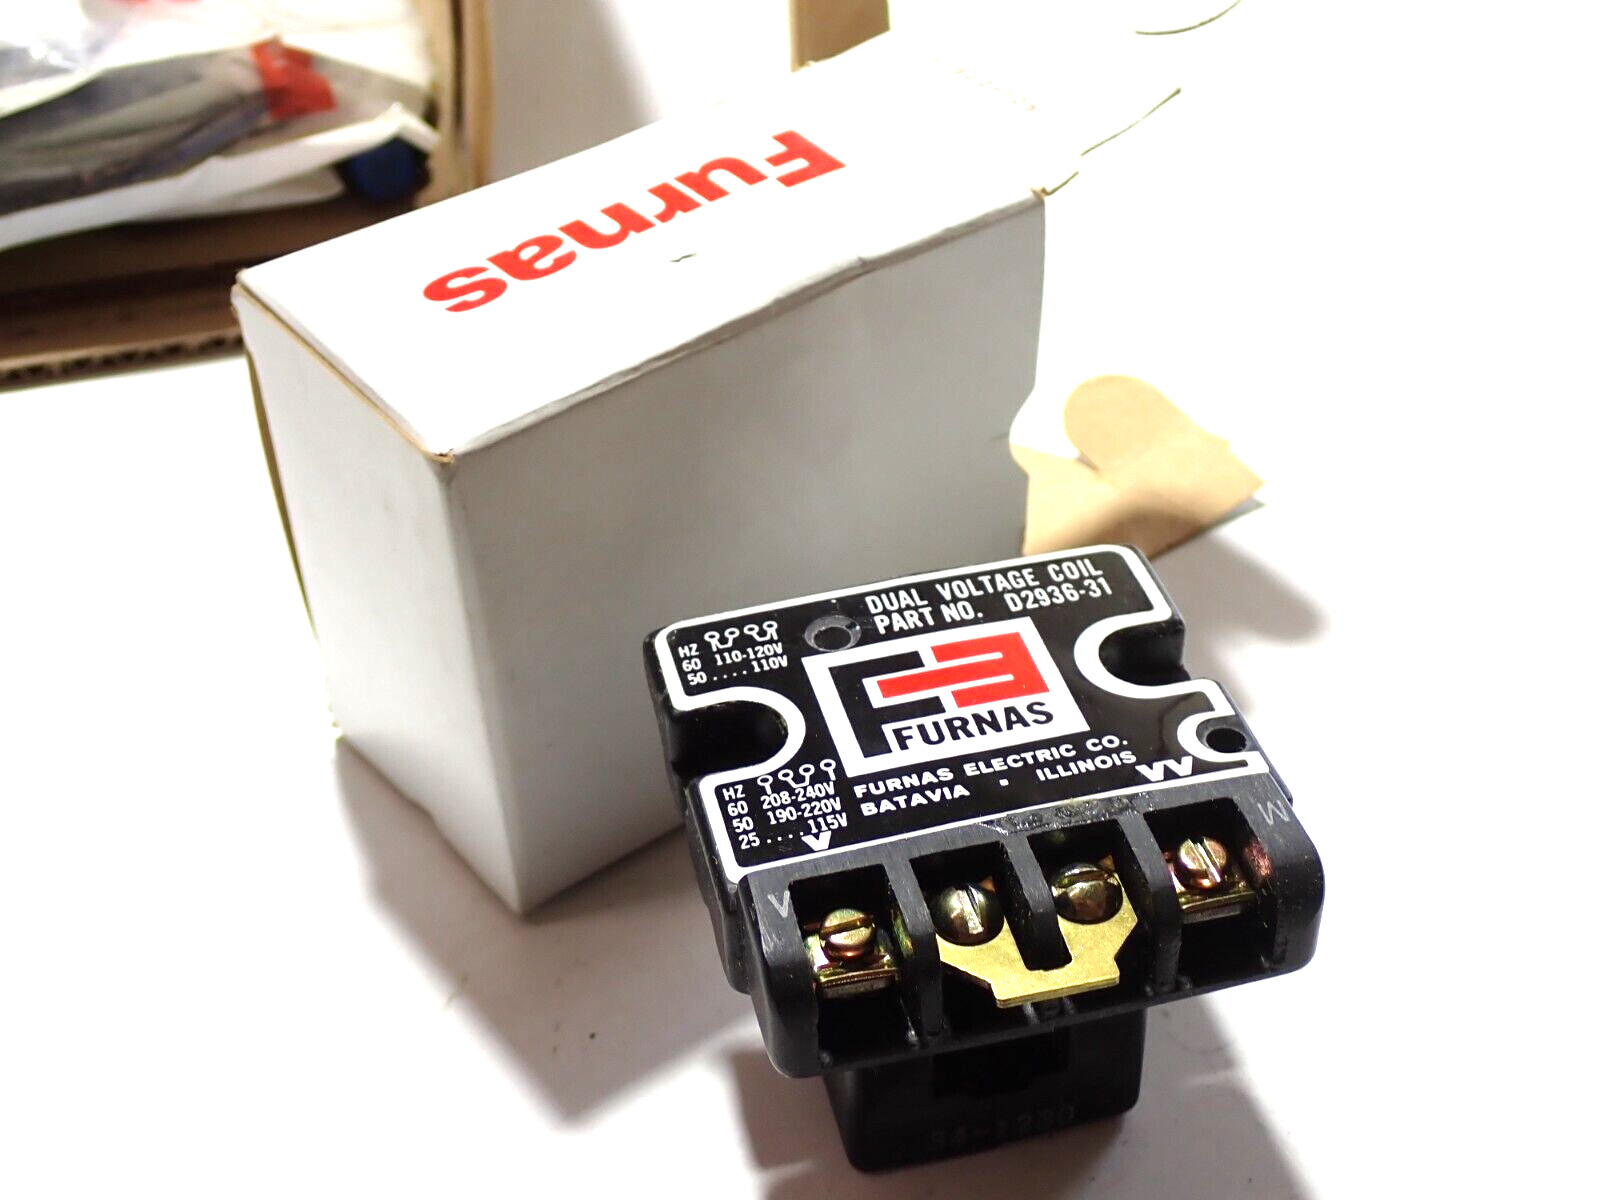 NEW IN BOX FURNAS COIL D02936031